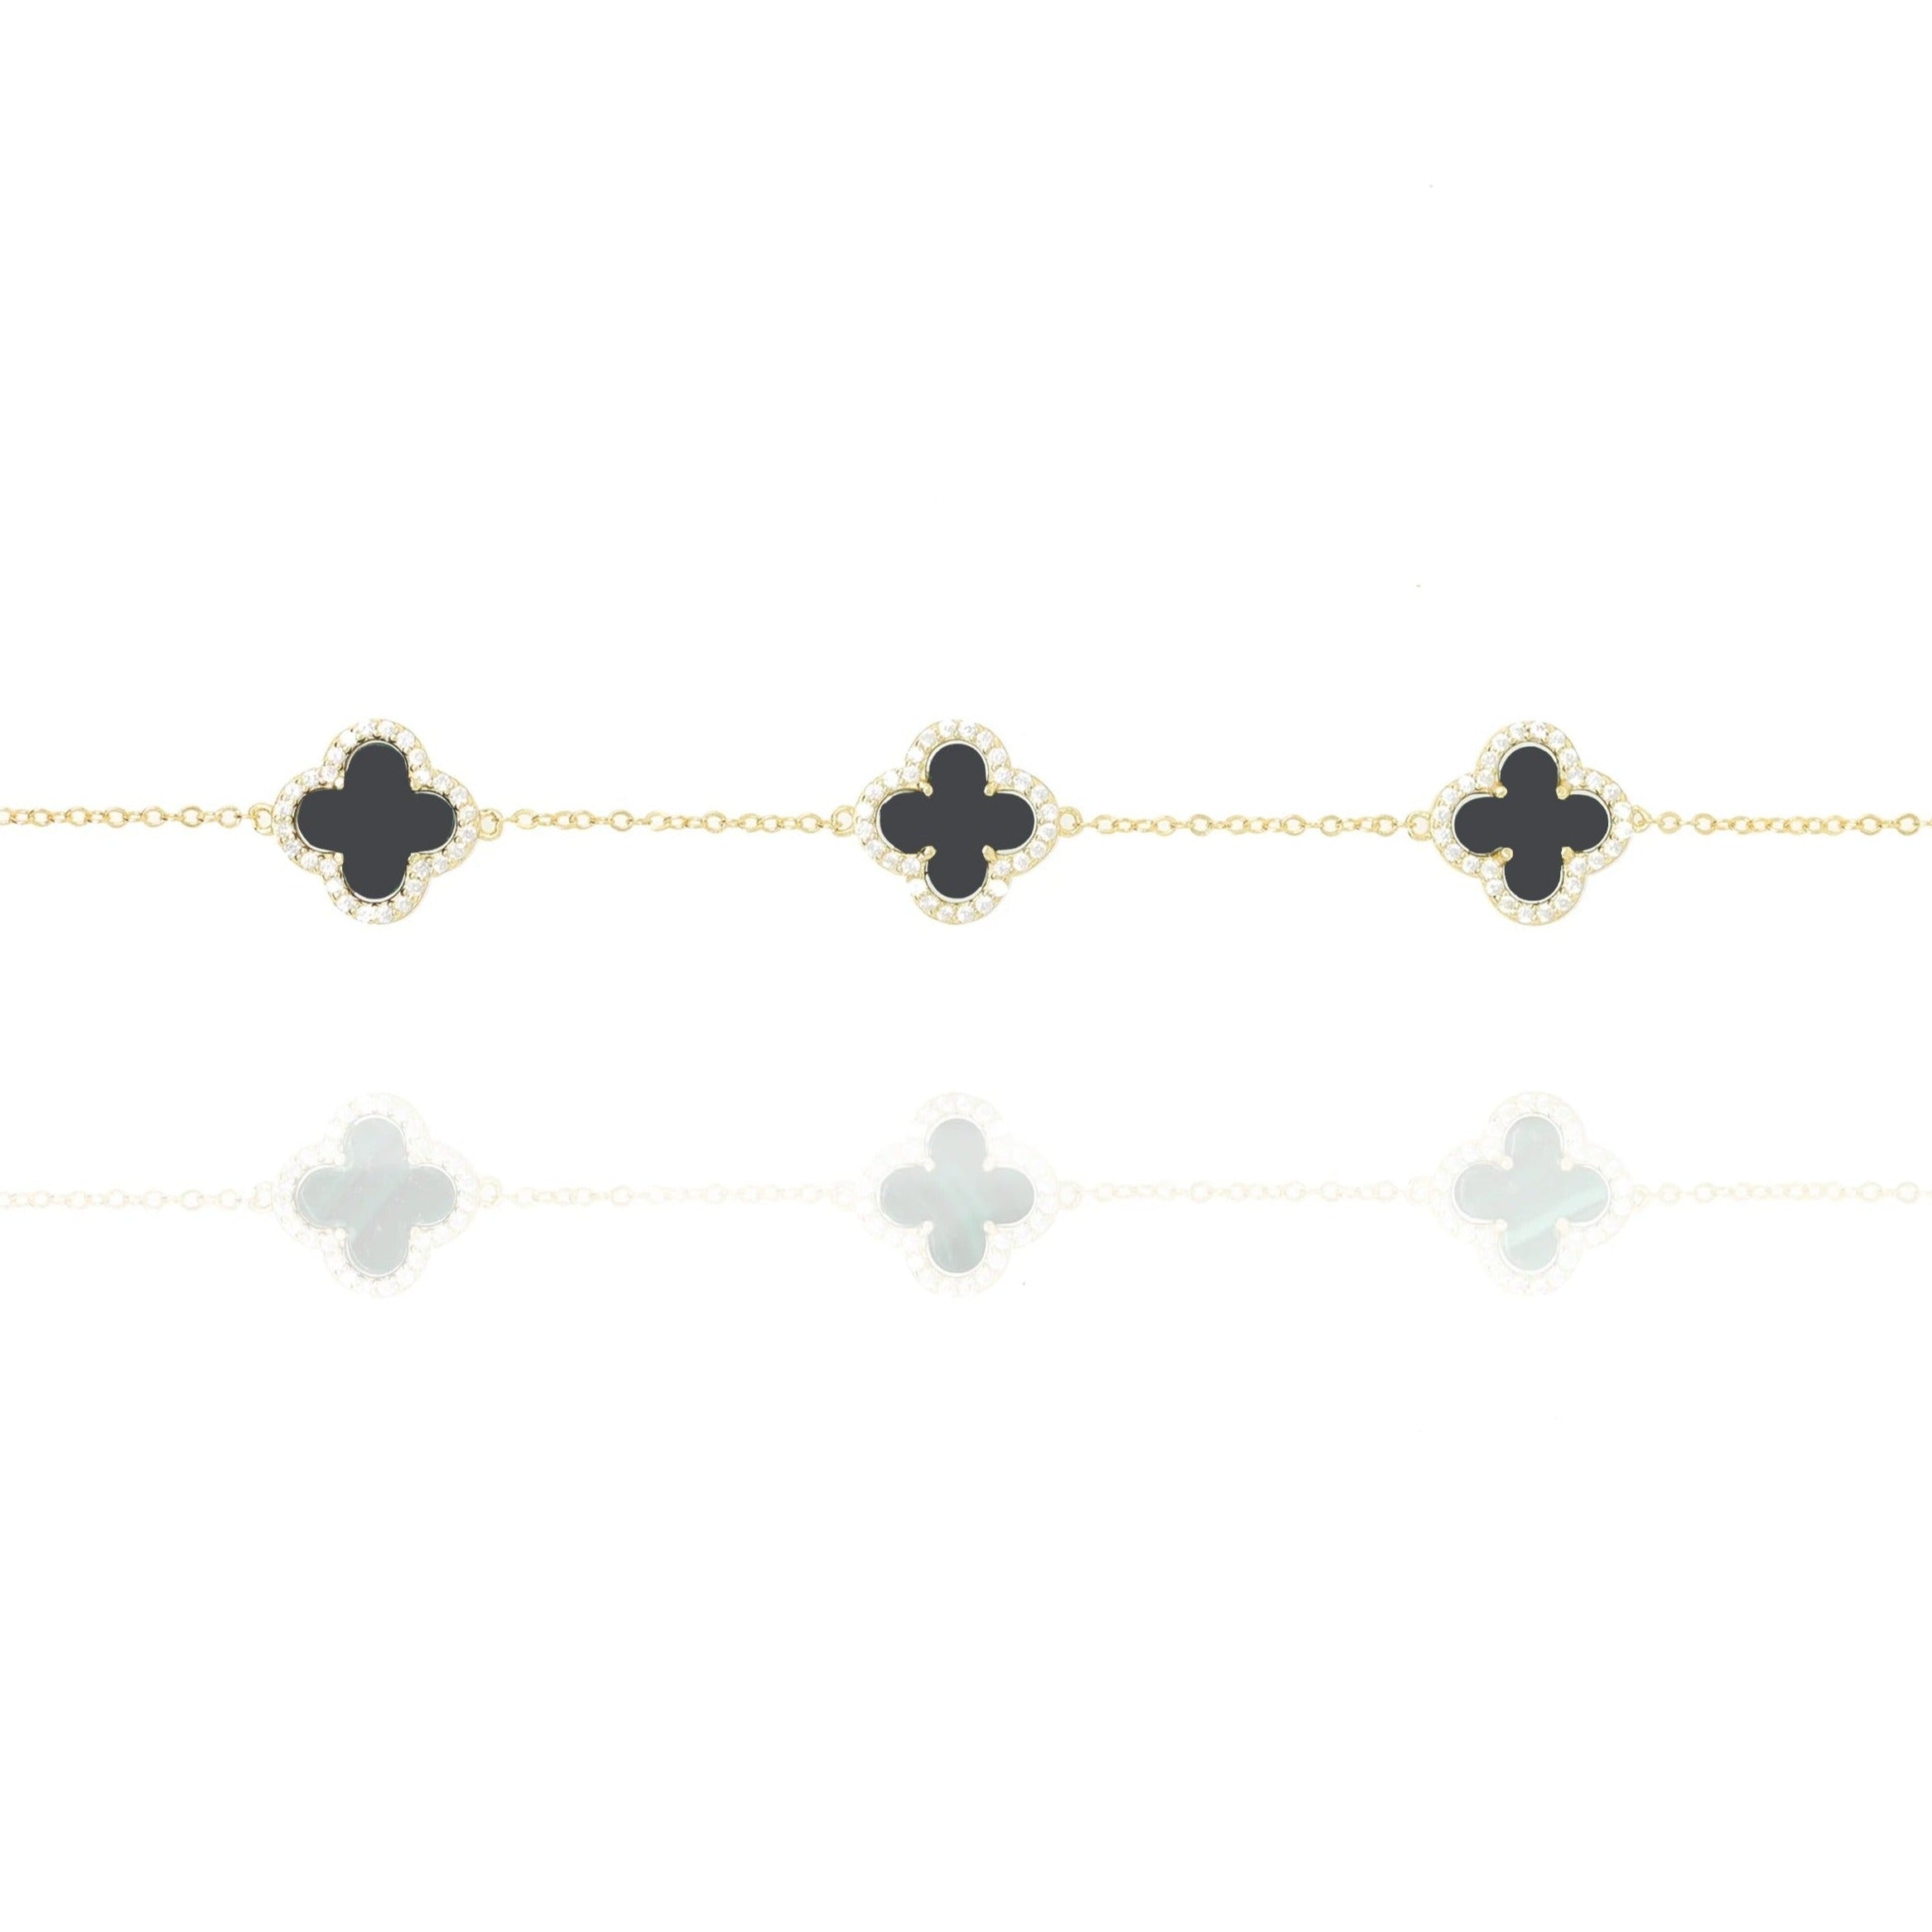 Clover Chain Bracelet with Black Onyx and Cubic Zirconia (Gold)